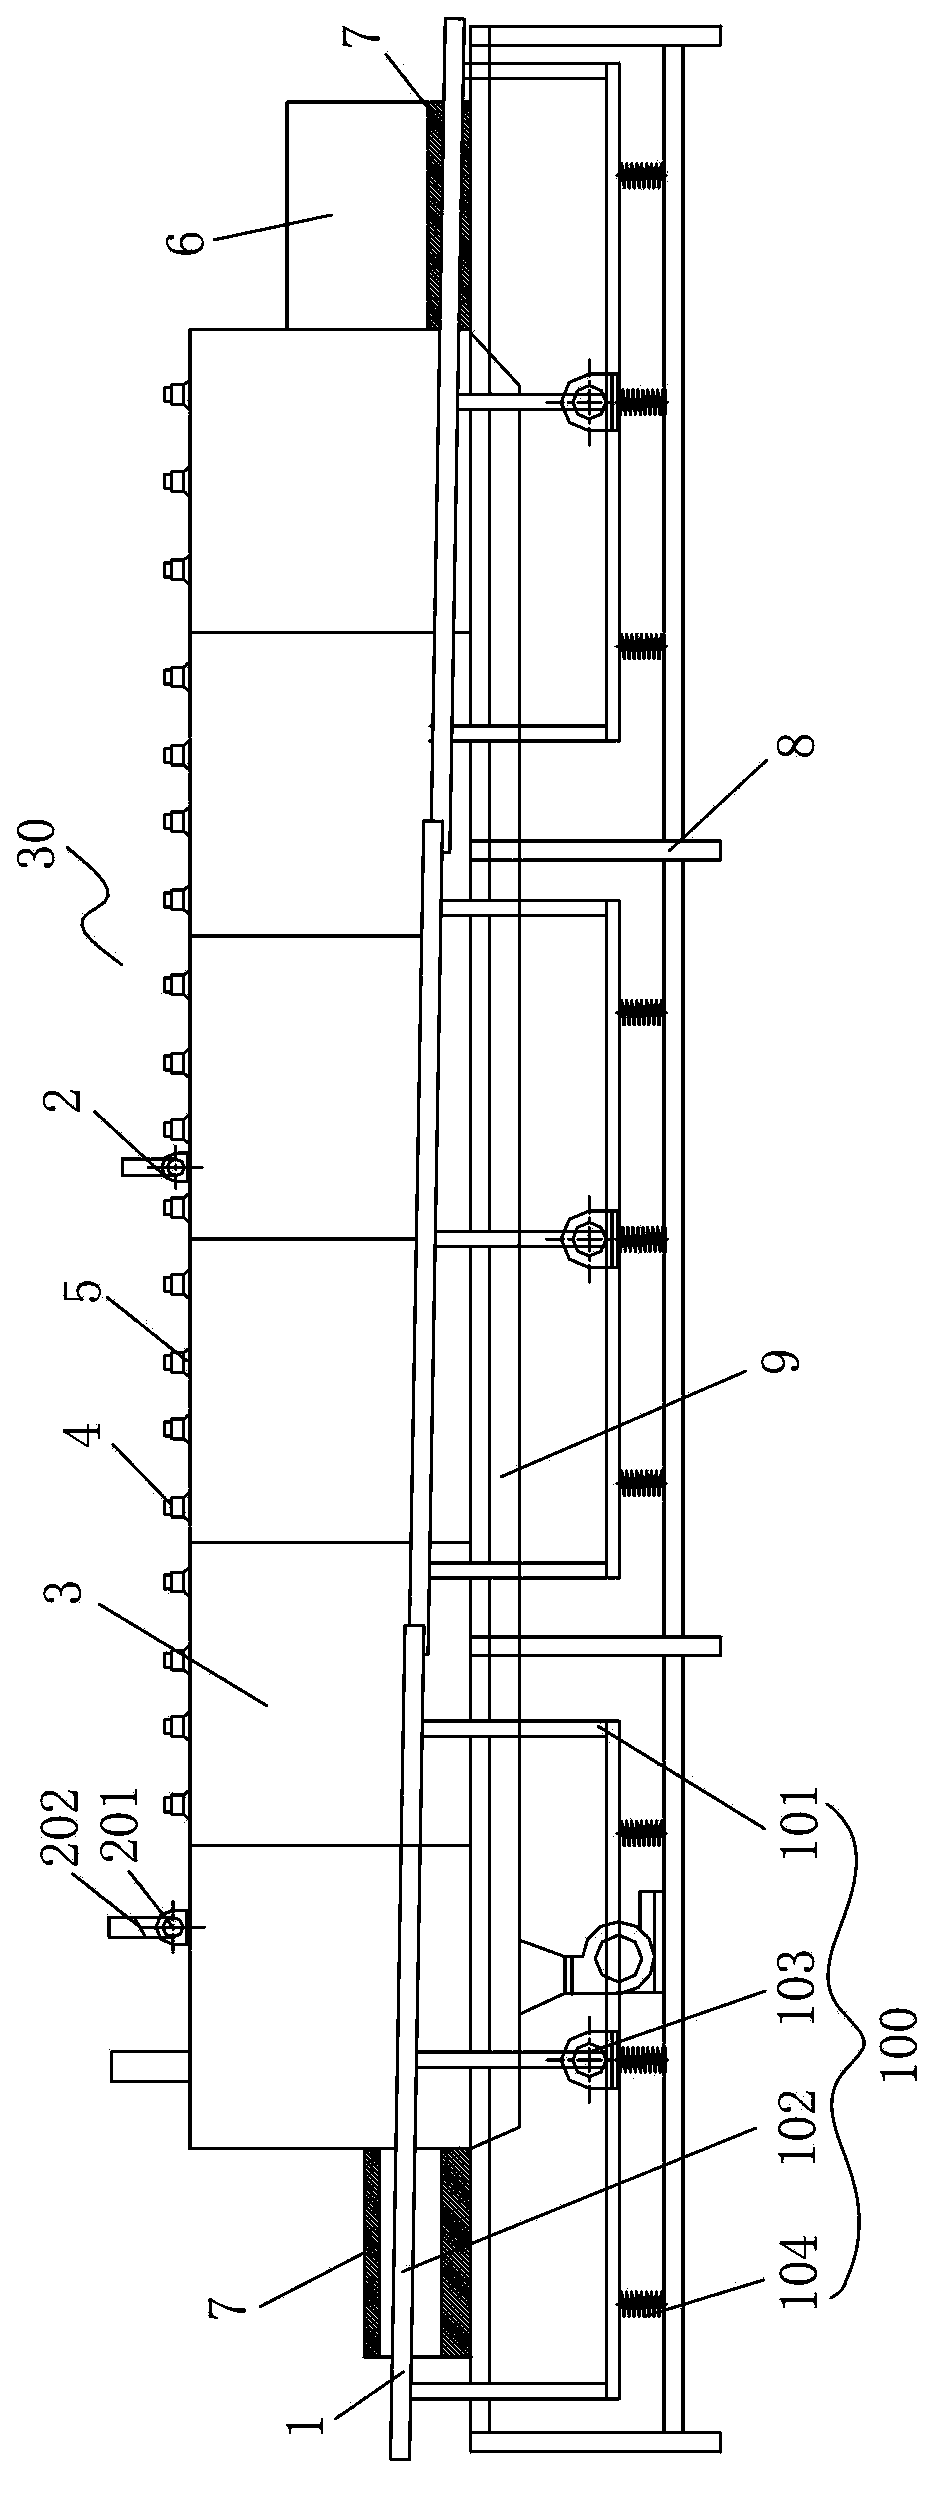 Device for drying agricultural products